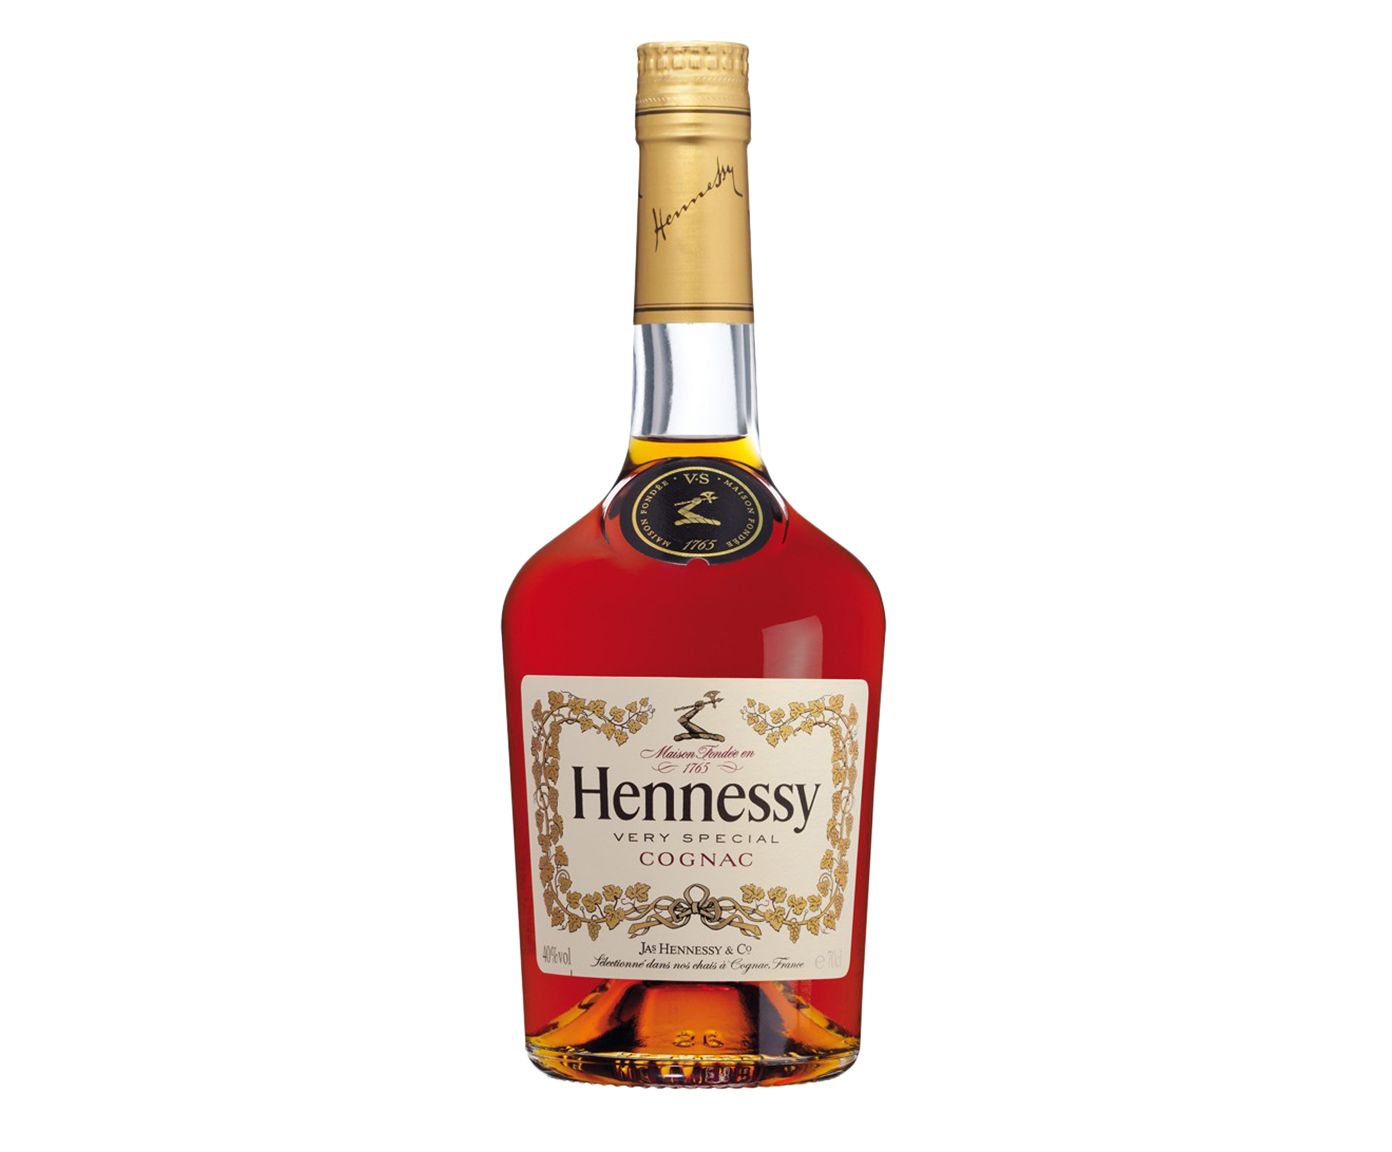 Cognac Hennessy Very Special - 700ml | Westwing.com.br